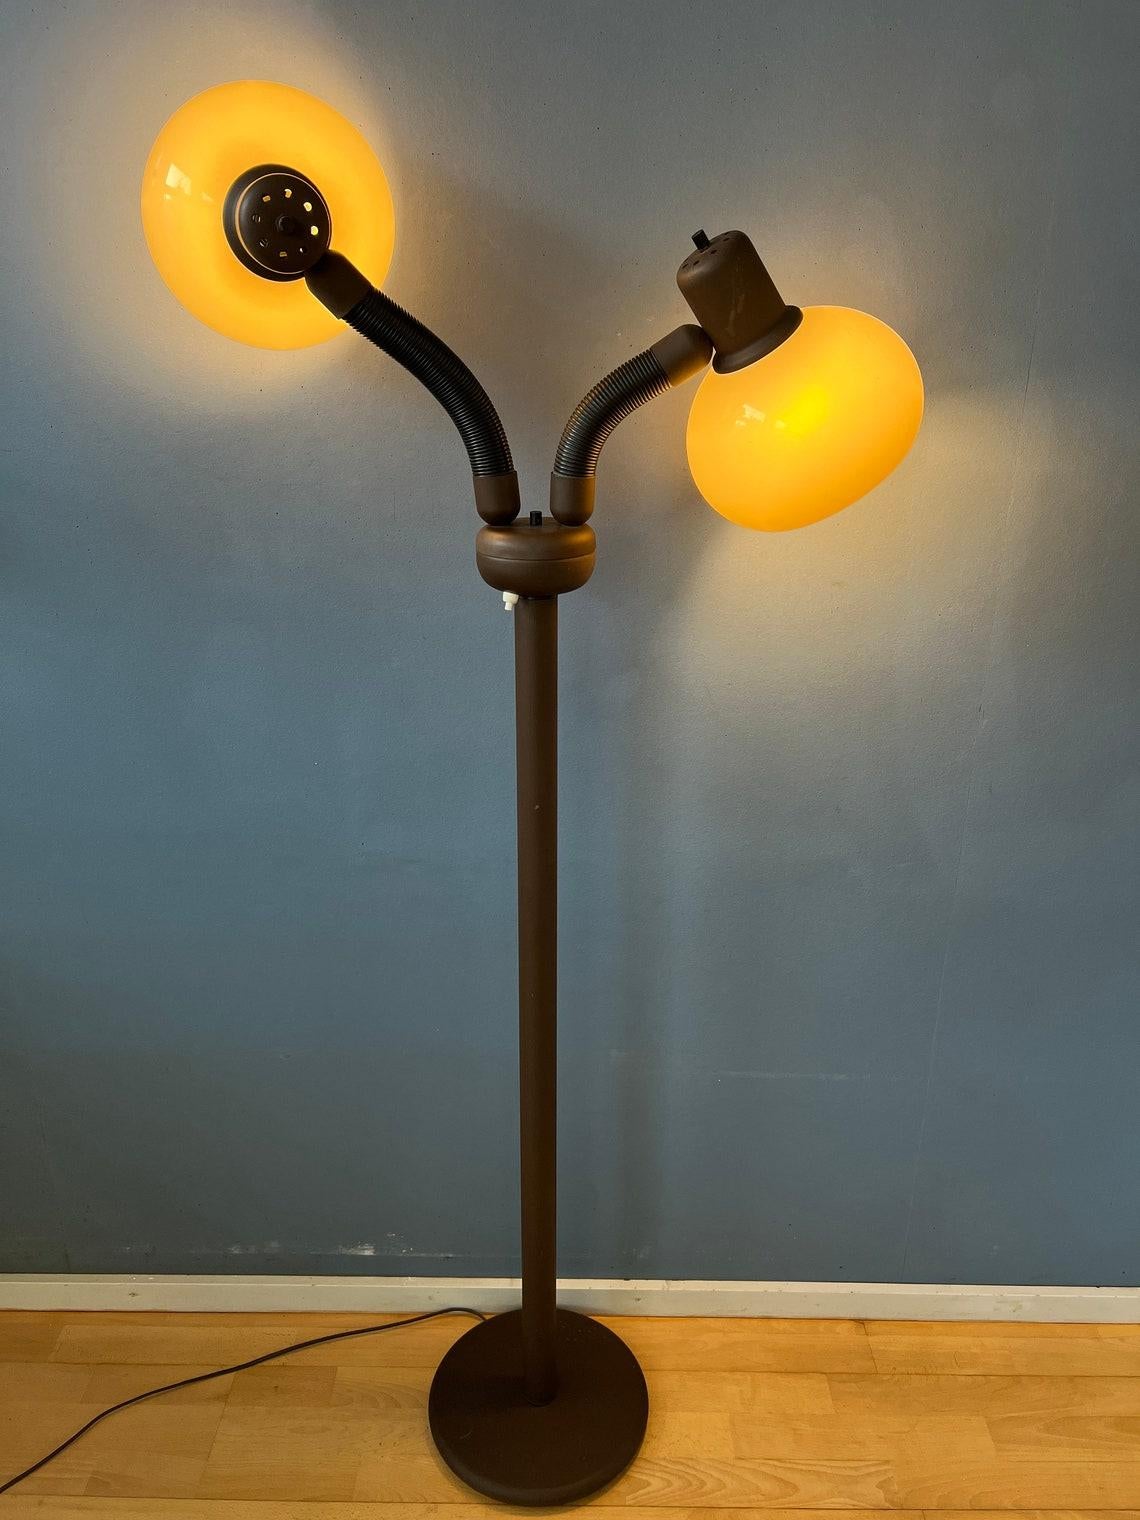 A classic Herda mushroom floorlamp in great condition. The mushroom shades with their tweakable arms can be turned in any direction desirable. The lamp requires two E27 bulbs and currently has an EU-plug.

Additional information:
Materials: Metal,